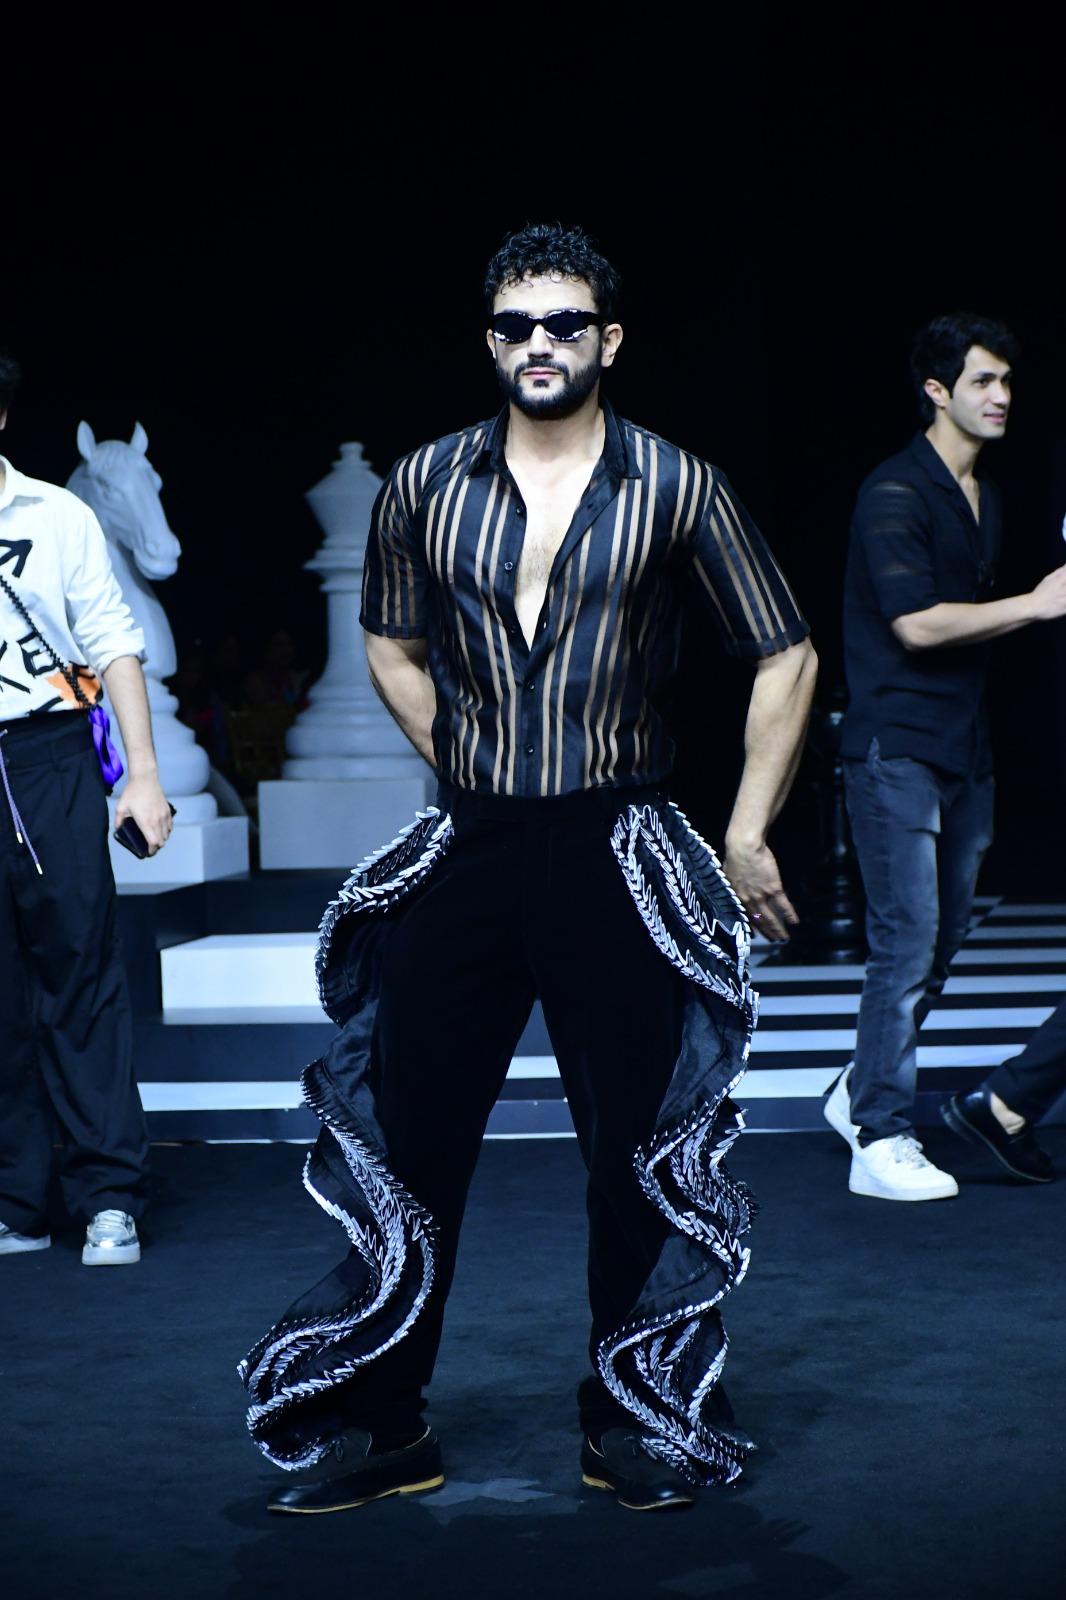 Actor Sahil Salathia was clicked at Lakme Fashion Week. Per usual, Salathia brought his A-game to the show